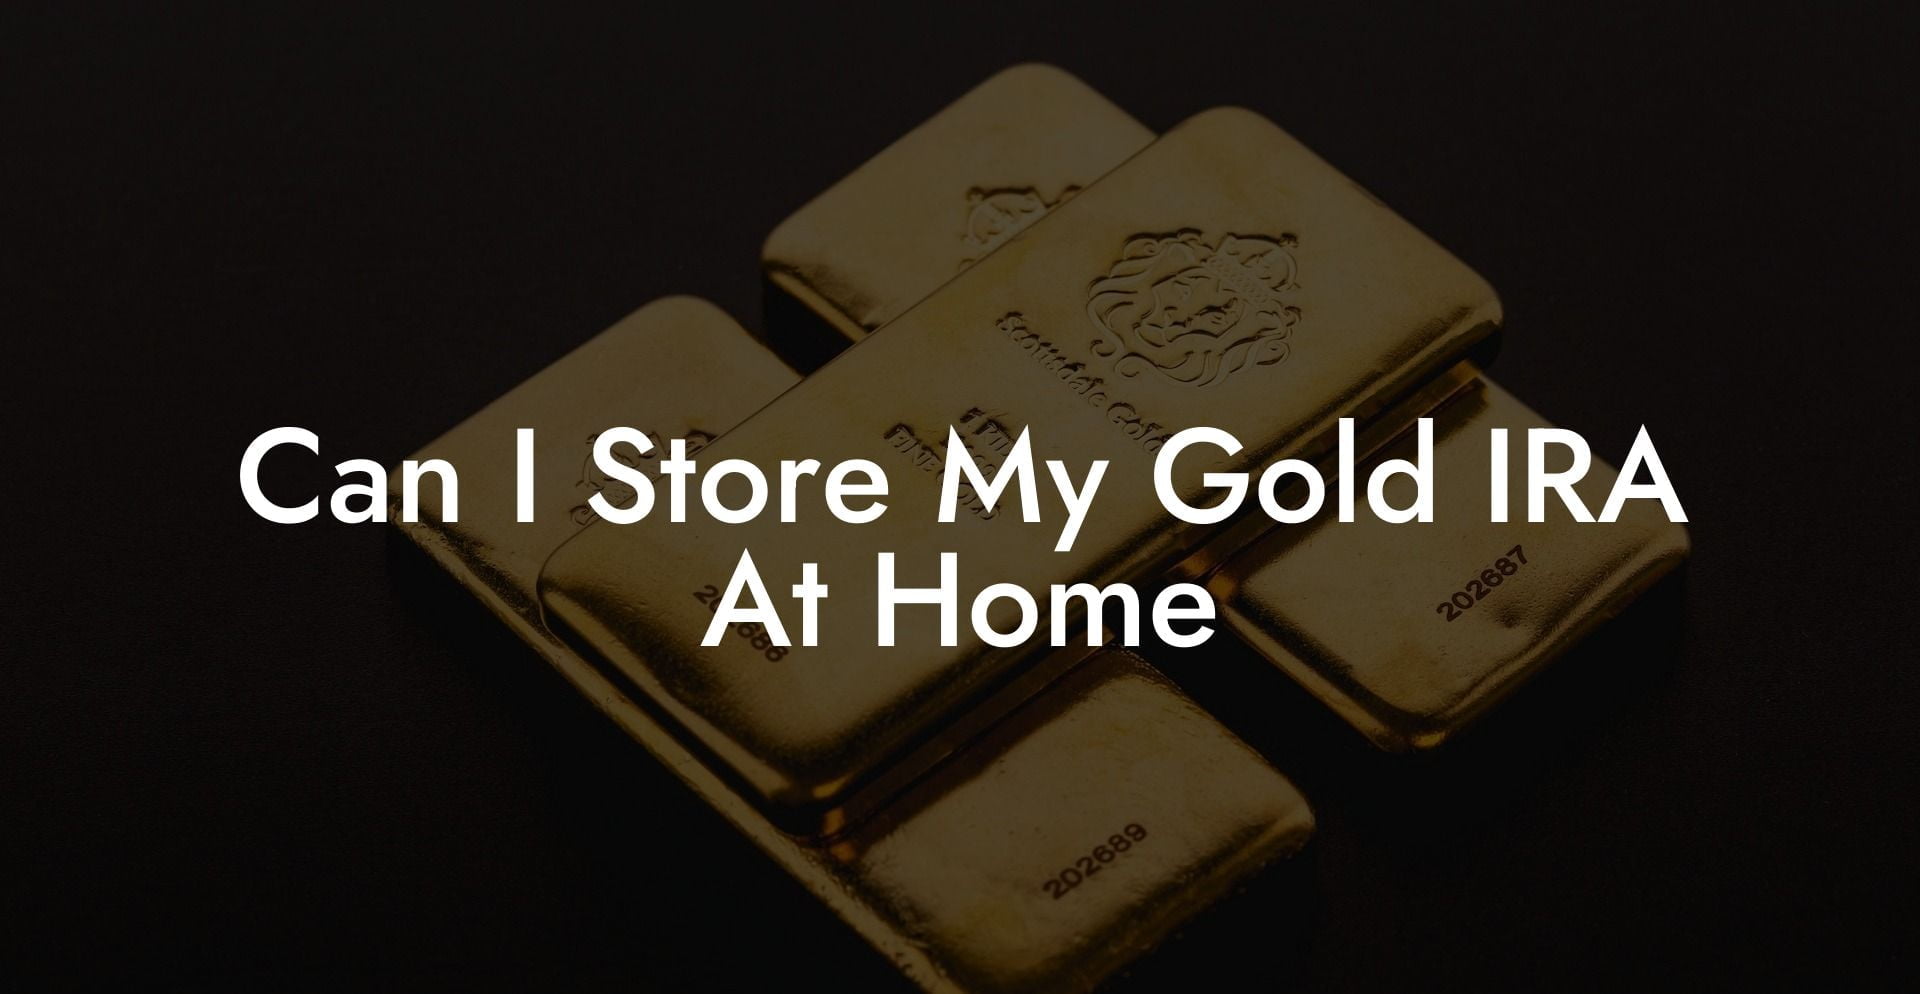 Can I Store My Gold IRA At Home